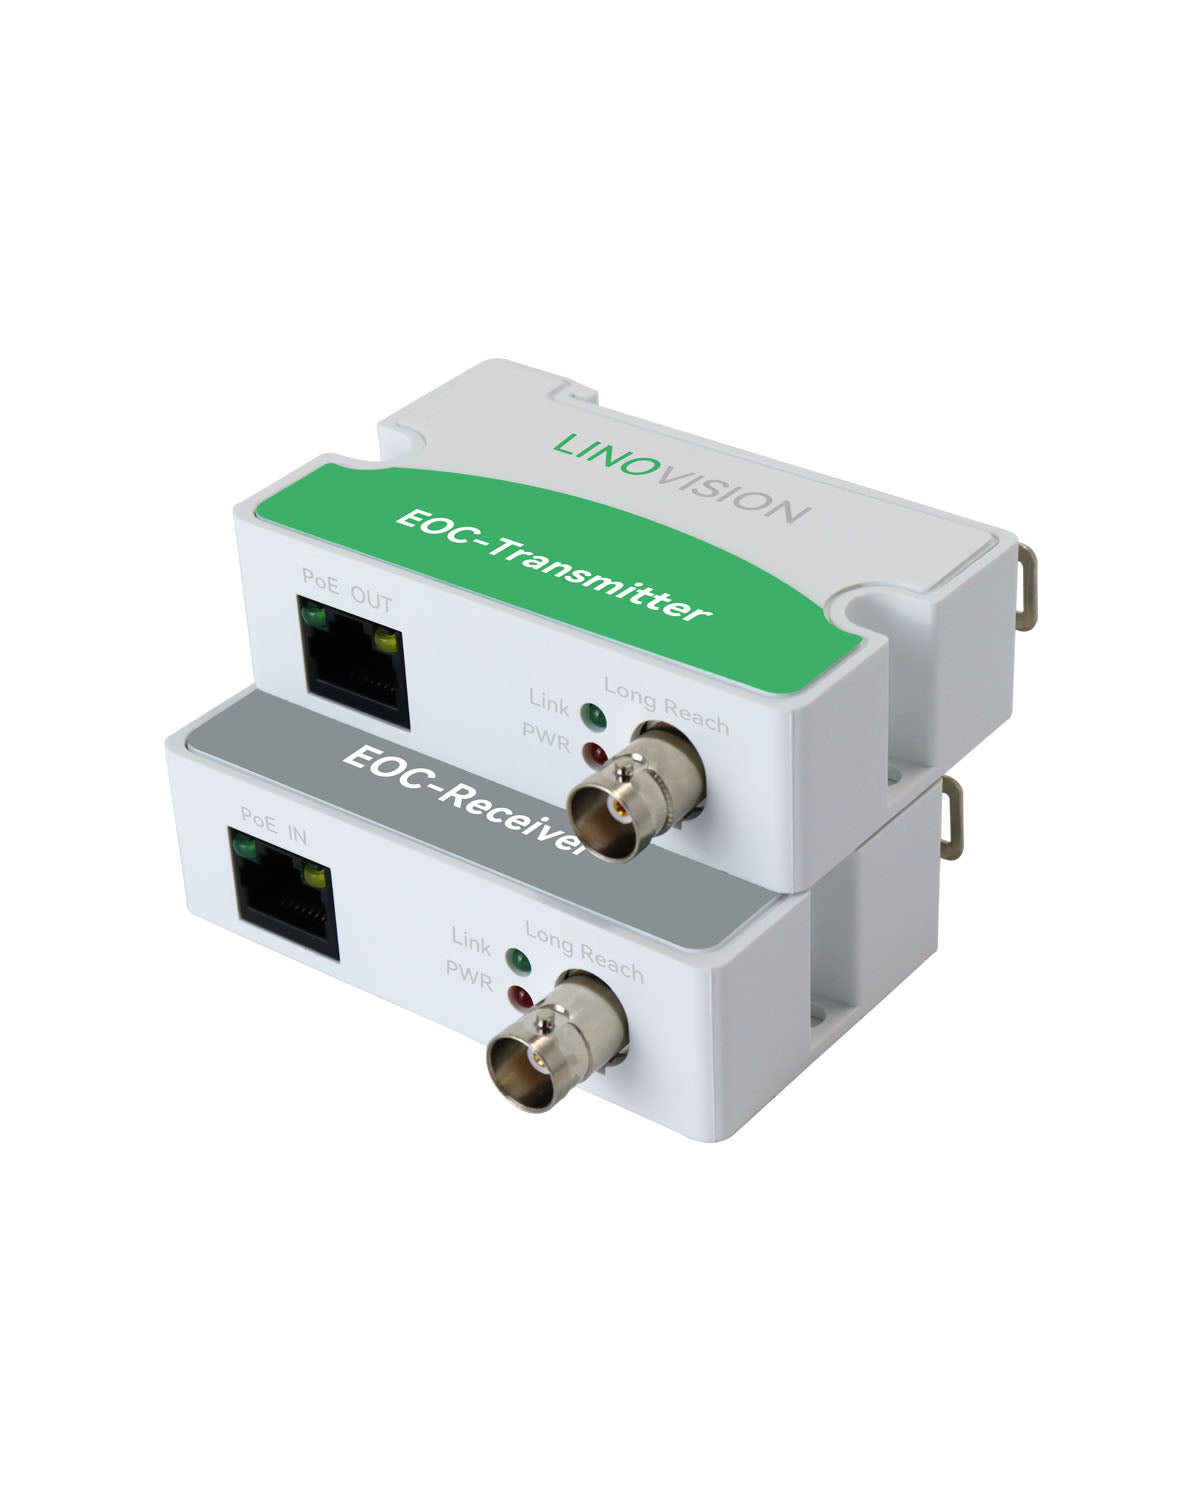 LINOVISION Ethernet Over Coax Converter (EOC) POE IP Over Coax Extender,  Max 3000ft Power and Data Transmission Over Regular RG59 Coaxial Cable